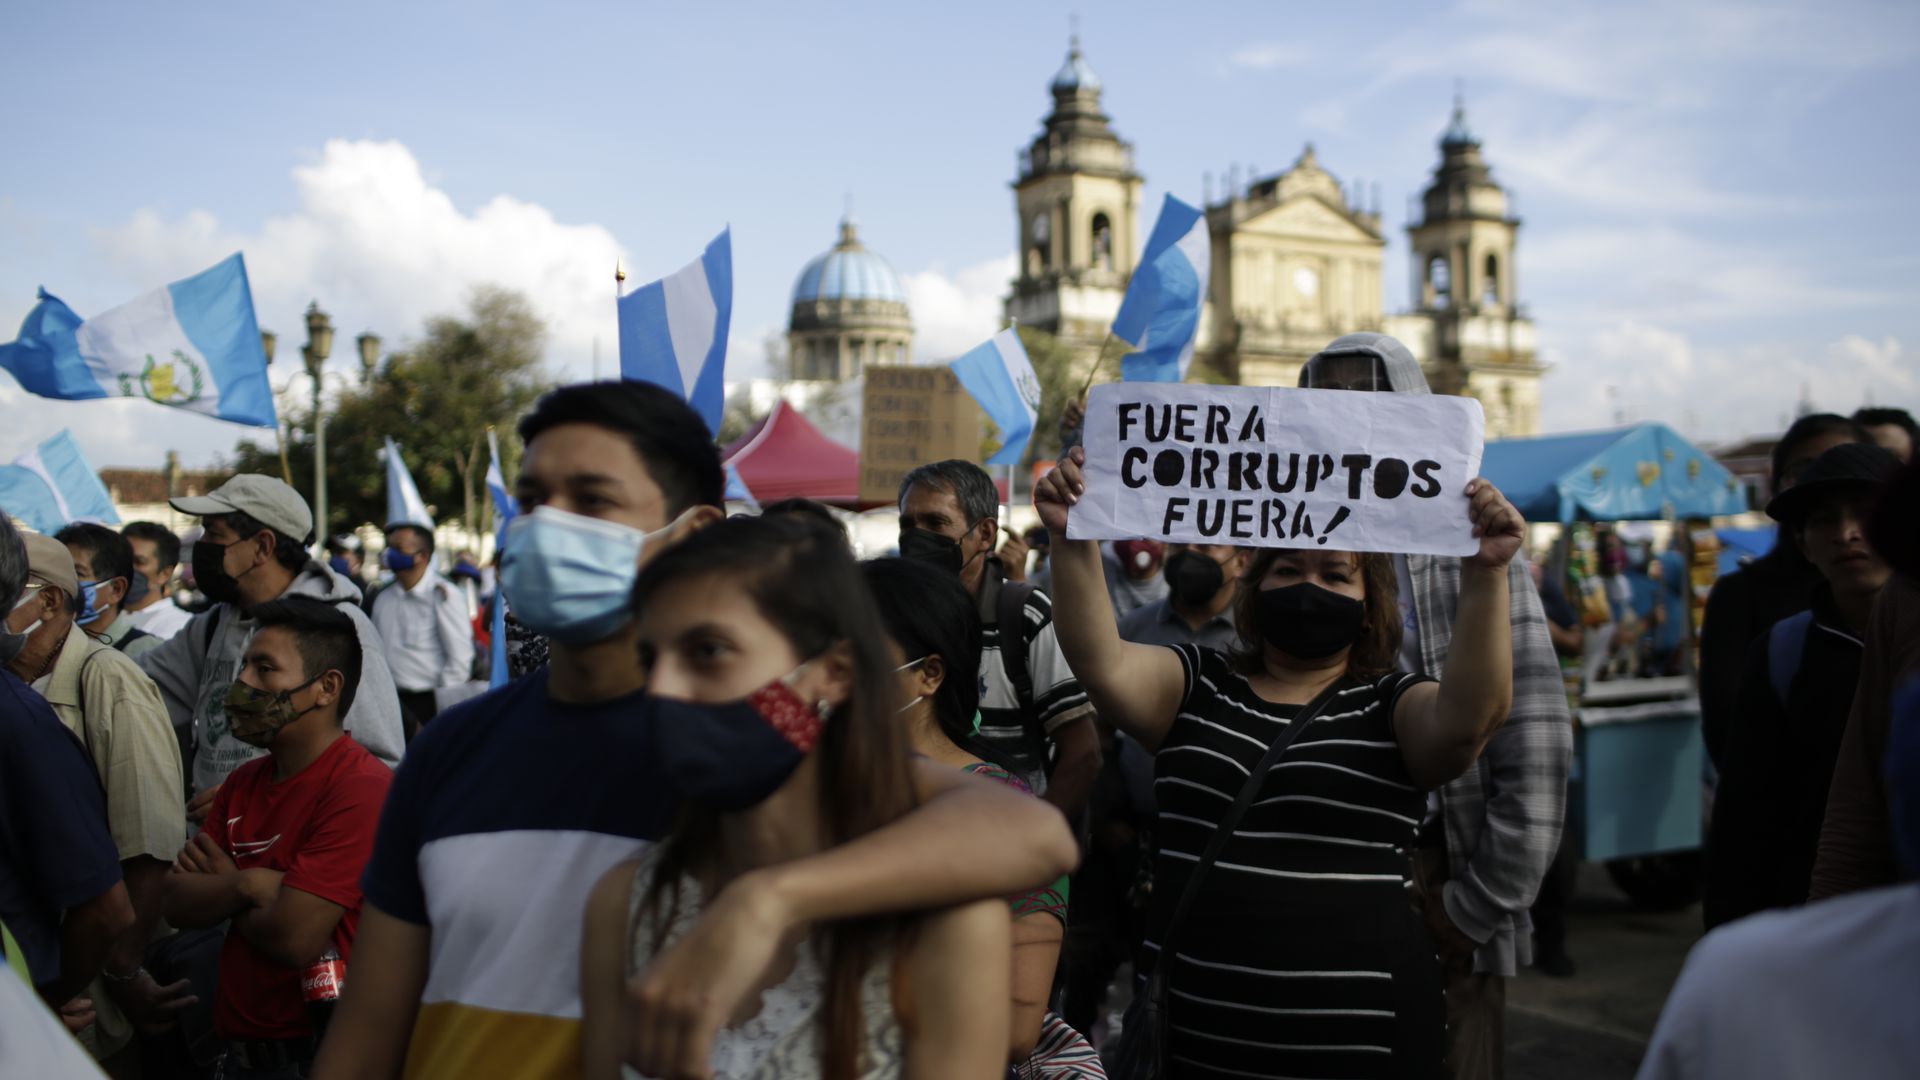 A protest in December against budget cuts and Congress members accused of corruption, in Guatemala City.